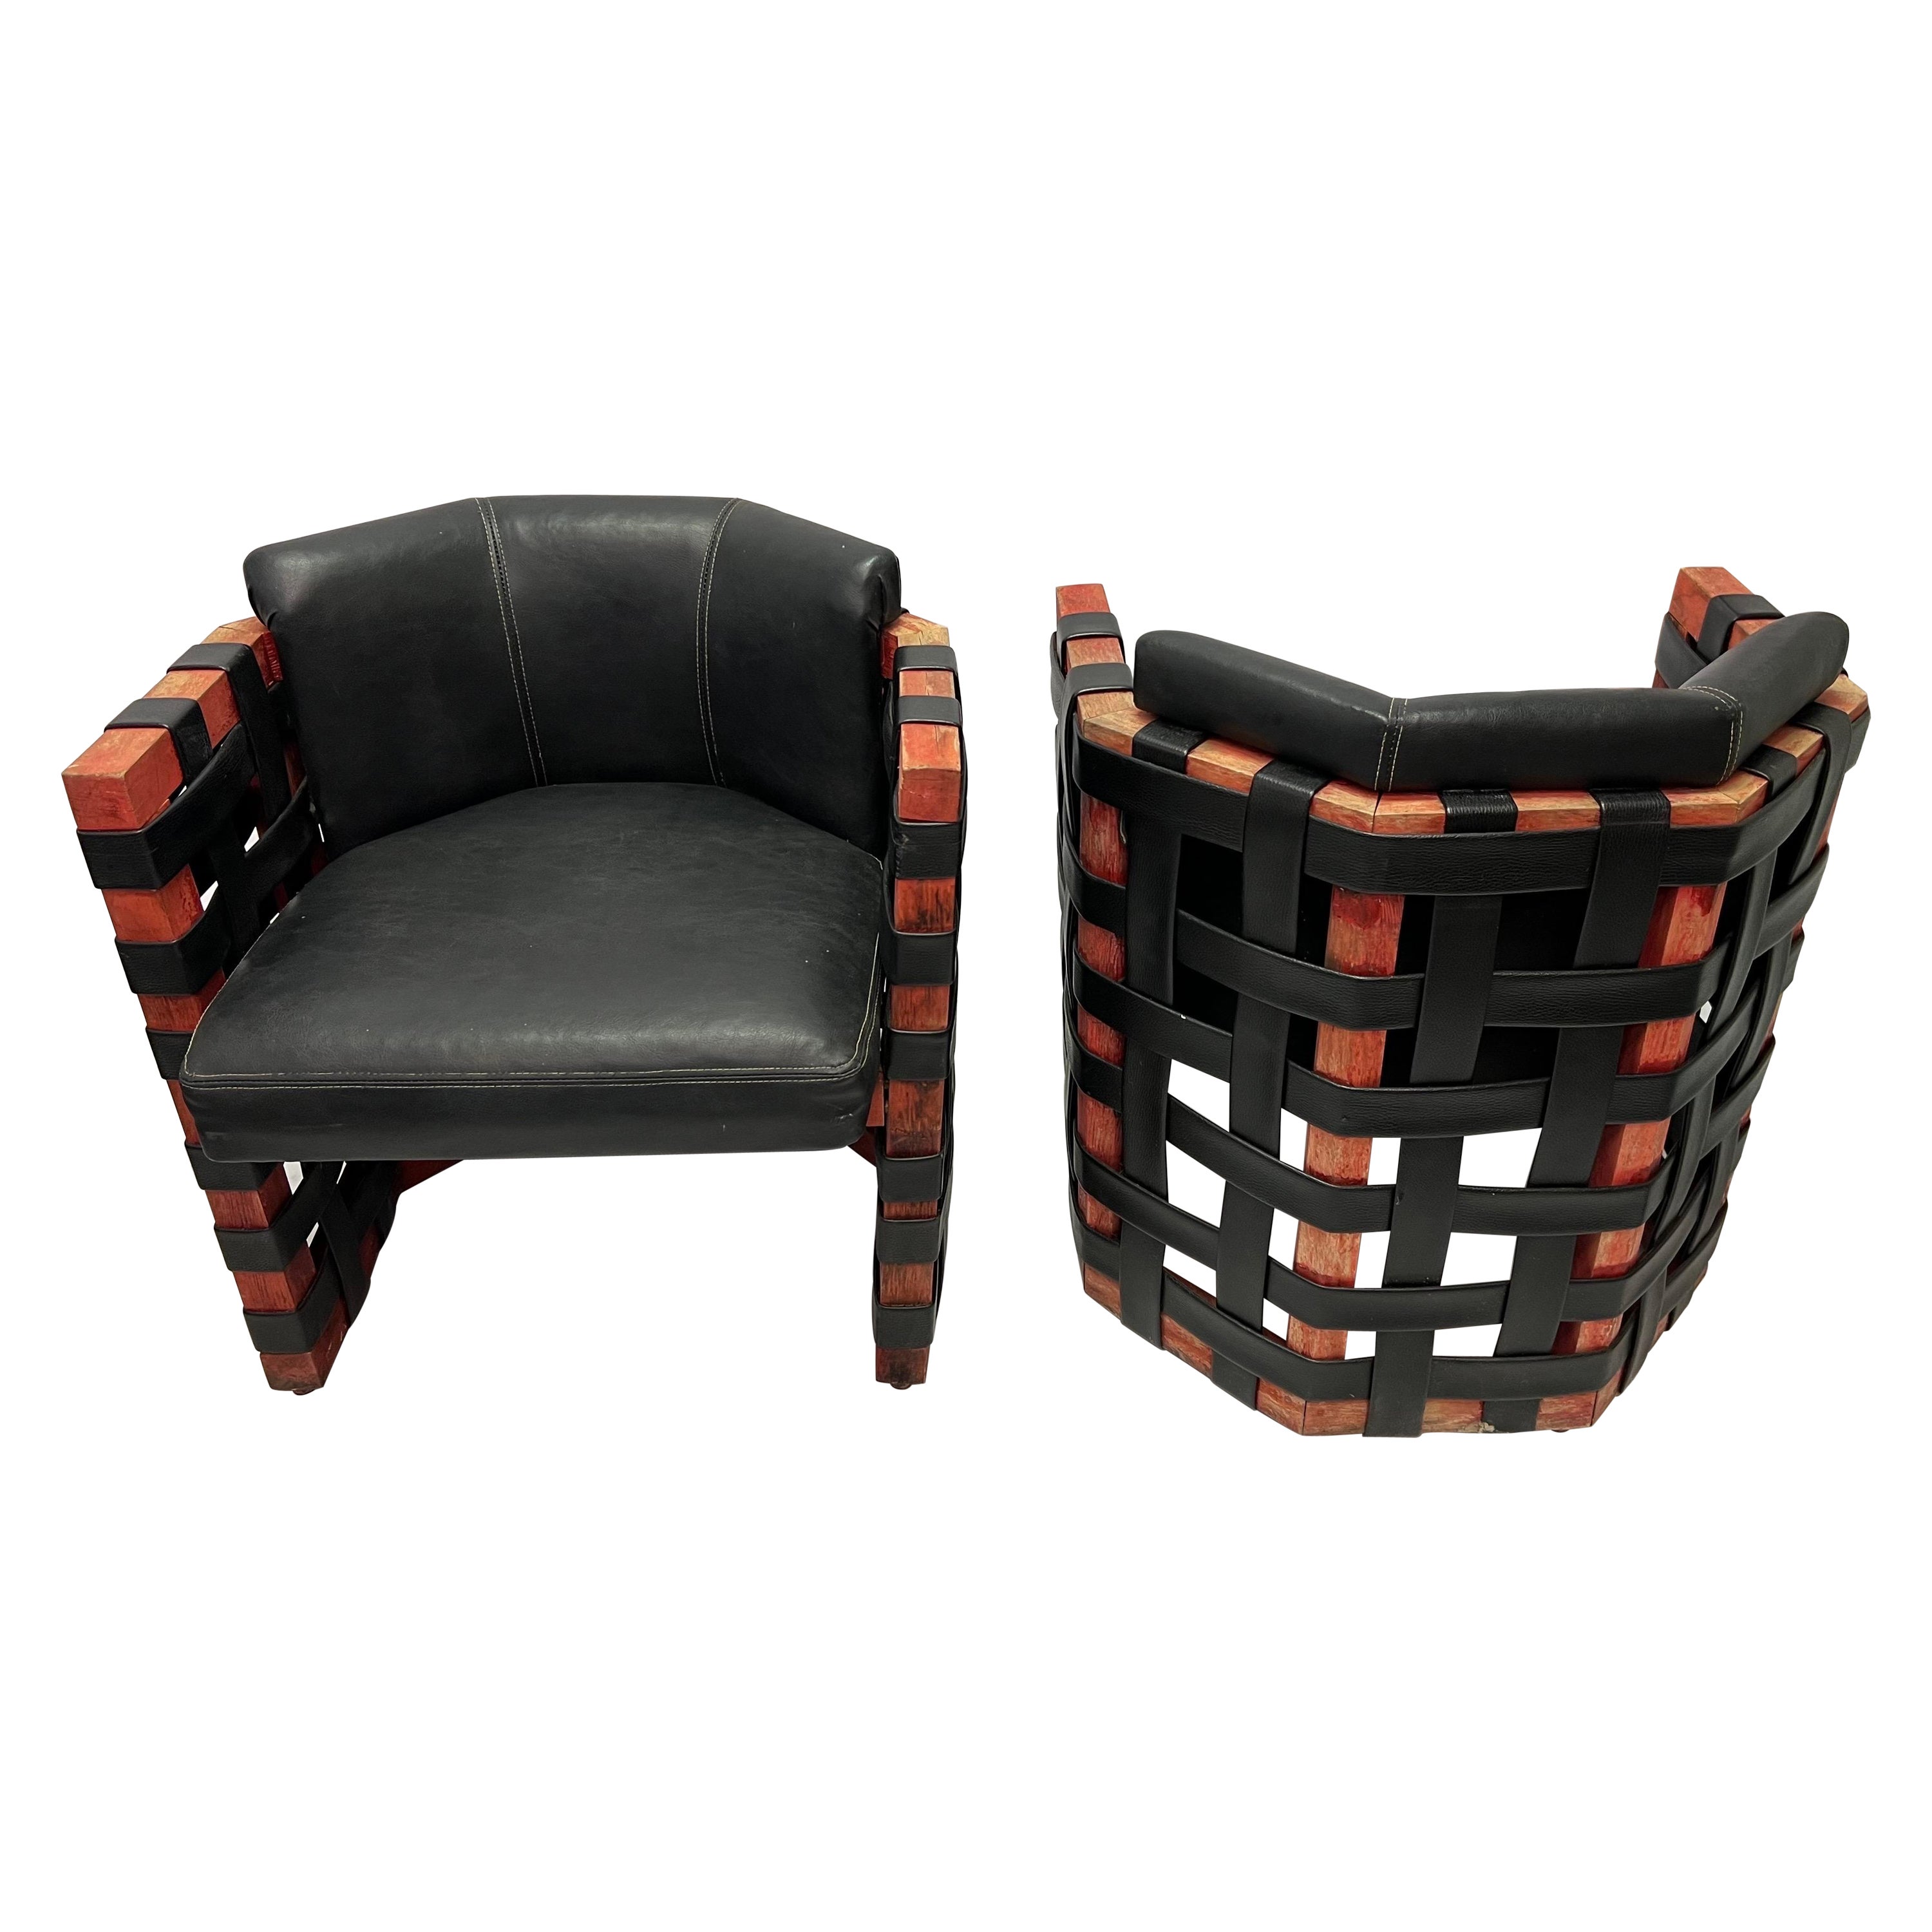 1950's French Brutalist Leder Strapping Barrel Chairs - ein Paar